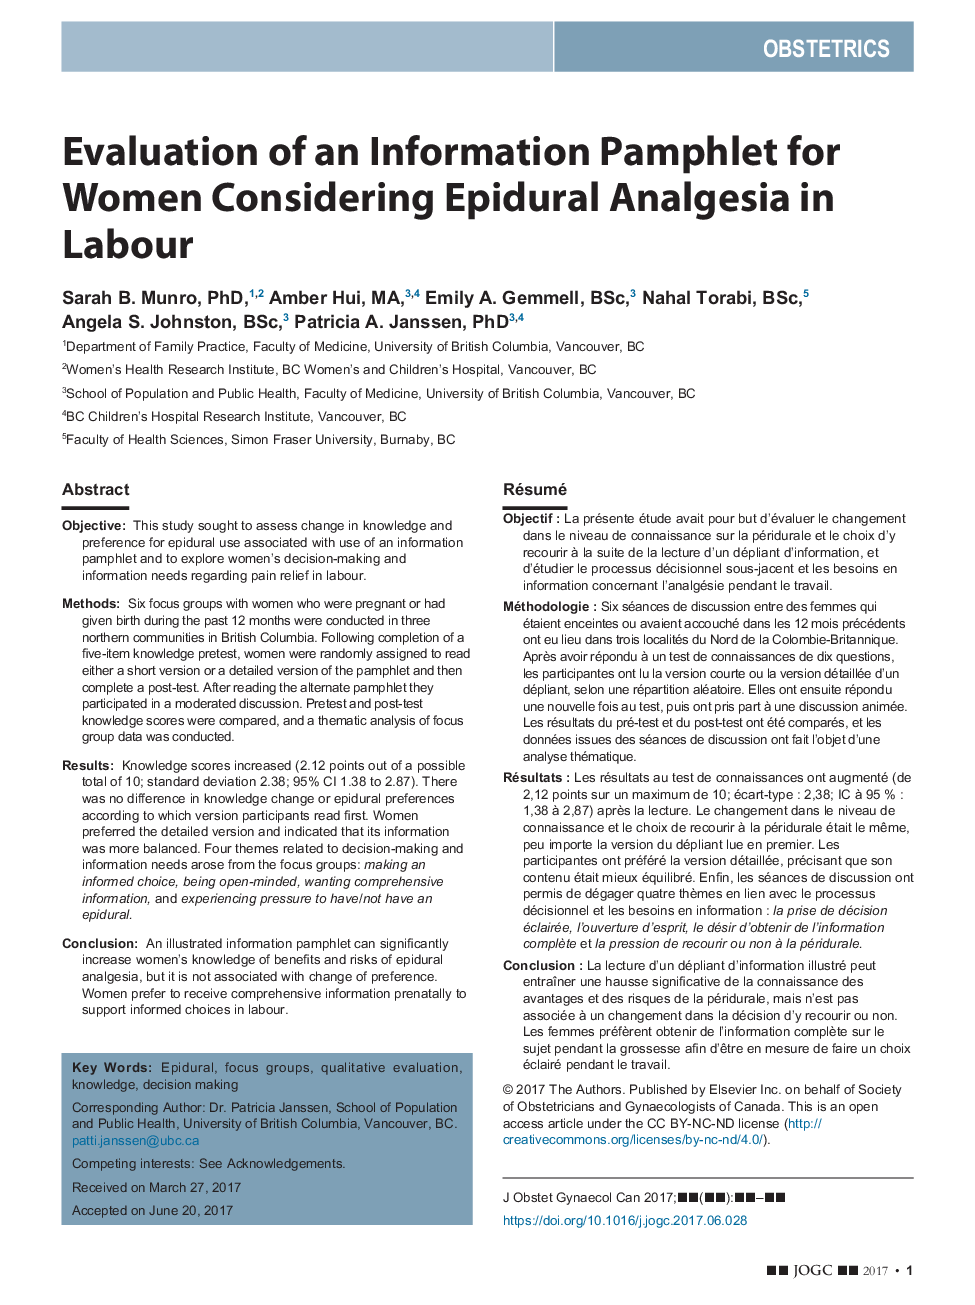 Evaluation of an Information Pamphlet for Women Considering Epidural Analgesia in Labour